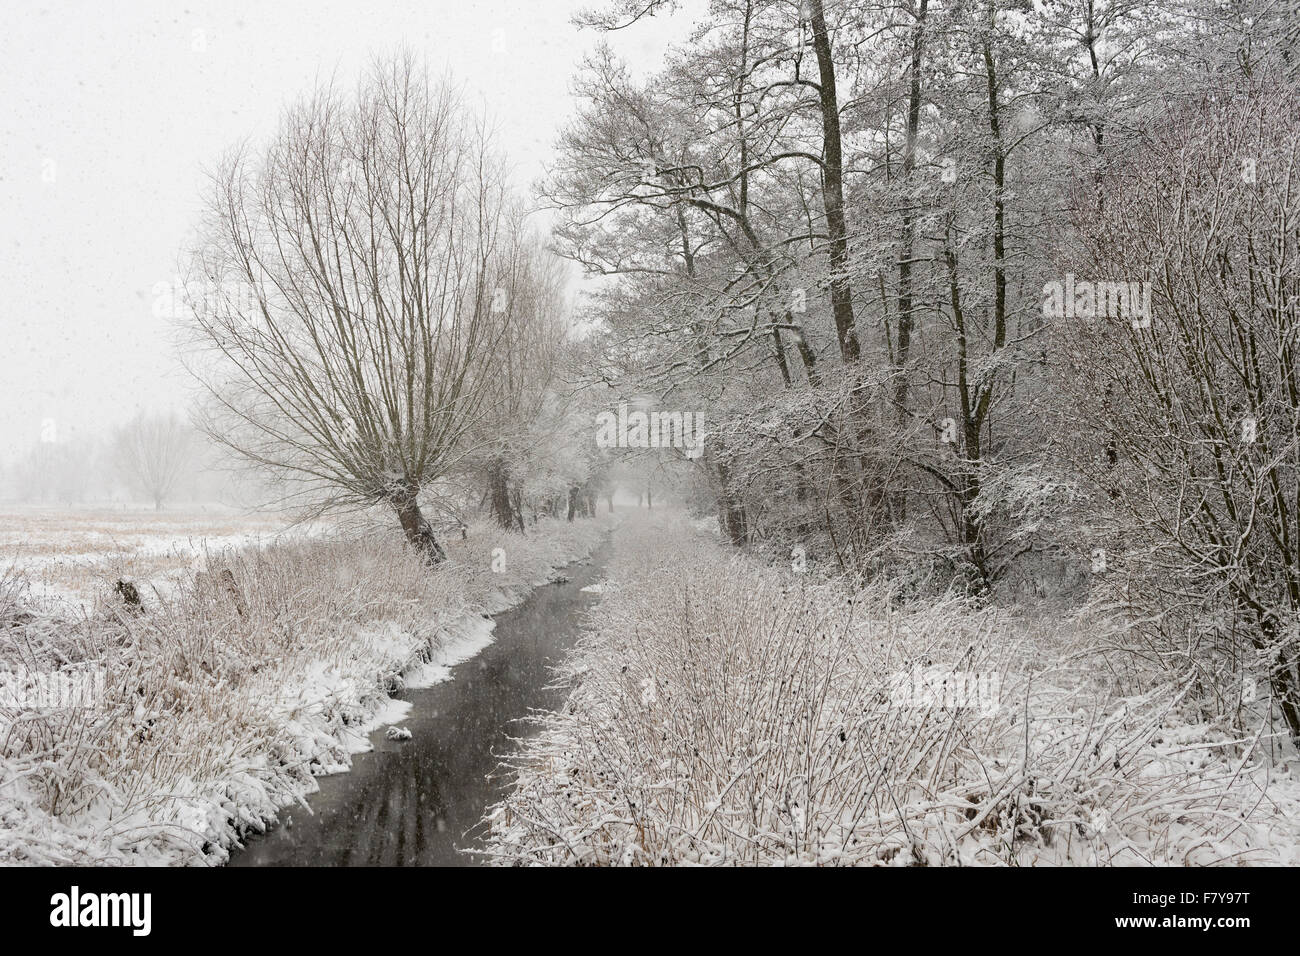 Onset of winter, wide open natural wetland area, old Rhine sling, near Duesseldorf, Germany. Stock Photo